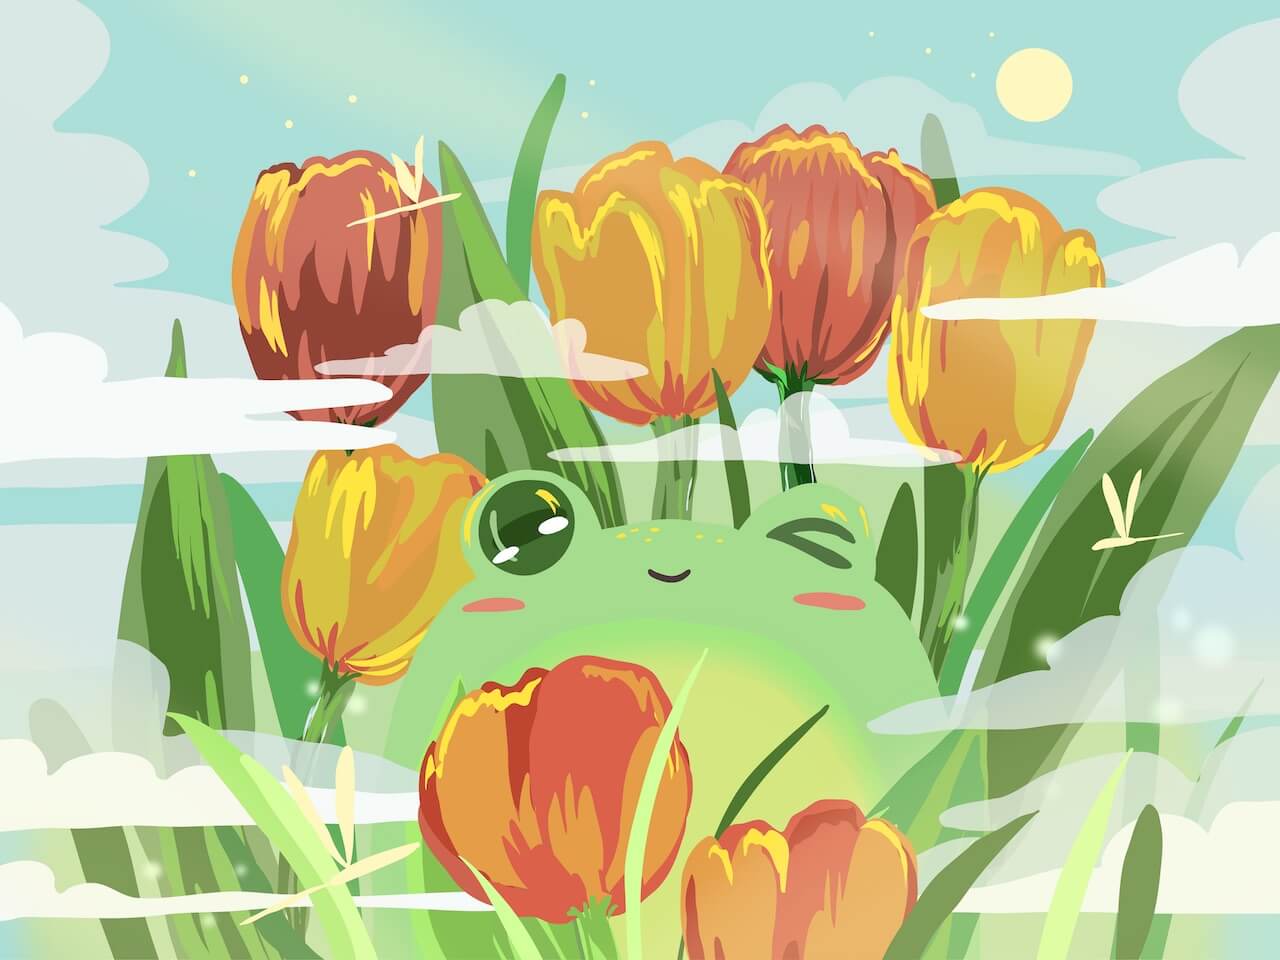 A whimsical illustration of a green frog peeking through vibrant tulips under a sunny sky